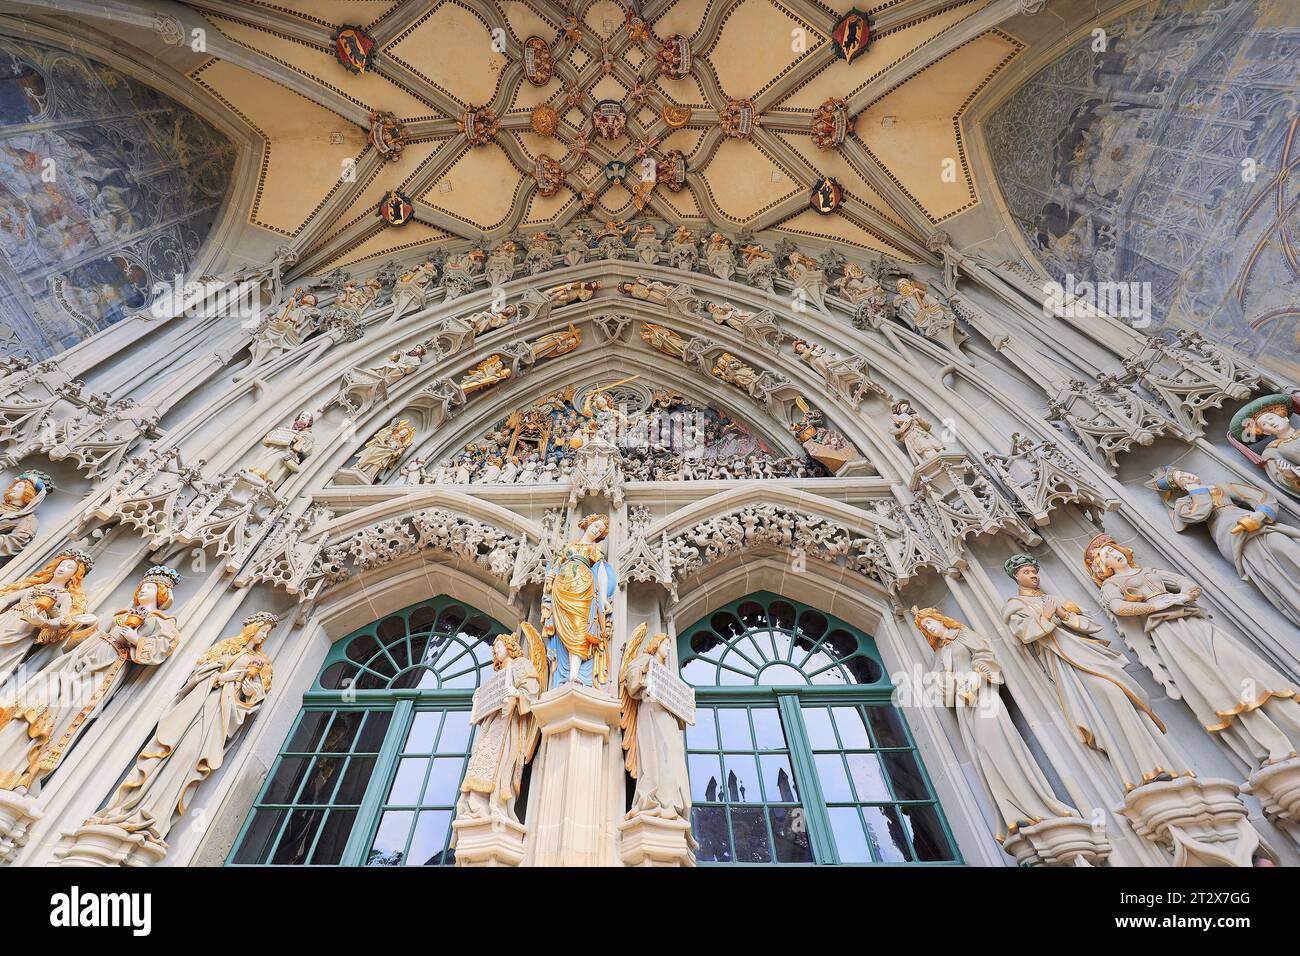 Arch gate of exterior main entrance of Cathedral of Bern, with famous Last Judgement stone carving of 15th century, Bern, Switzerland Stock Photo